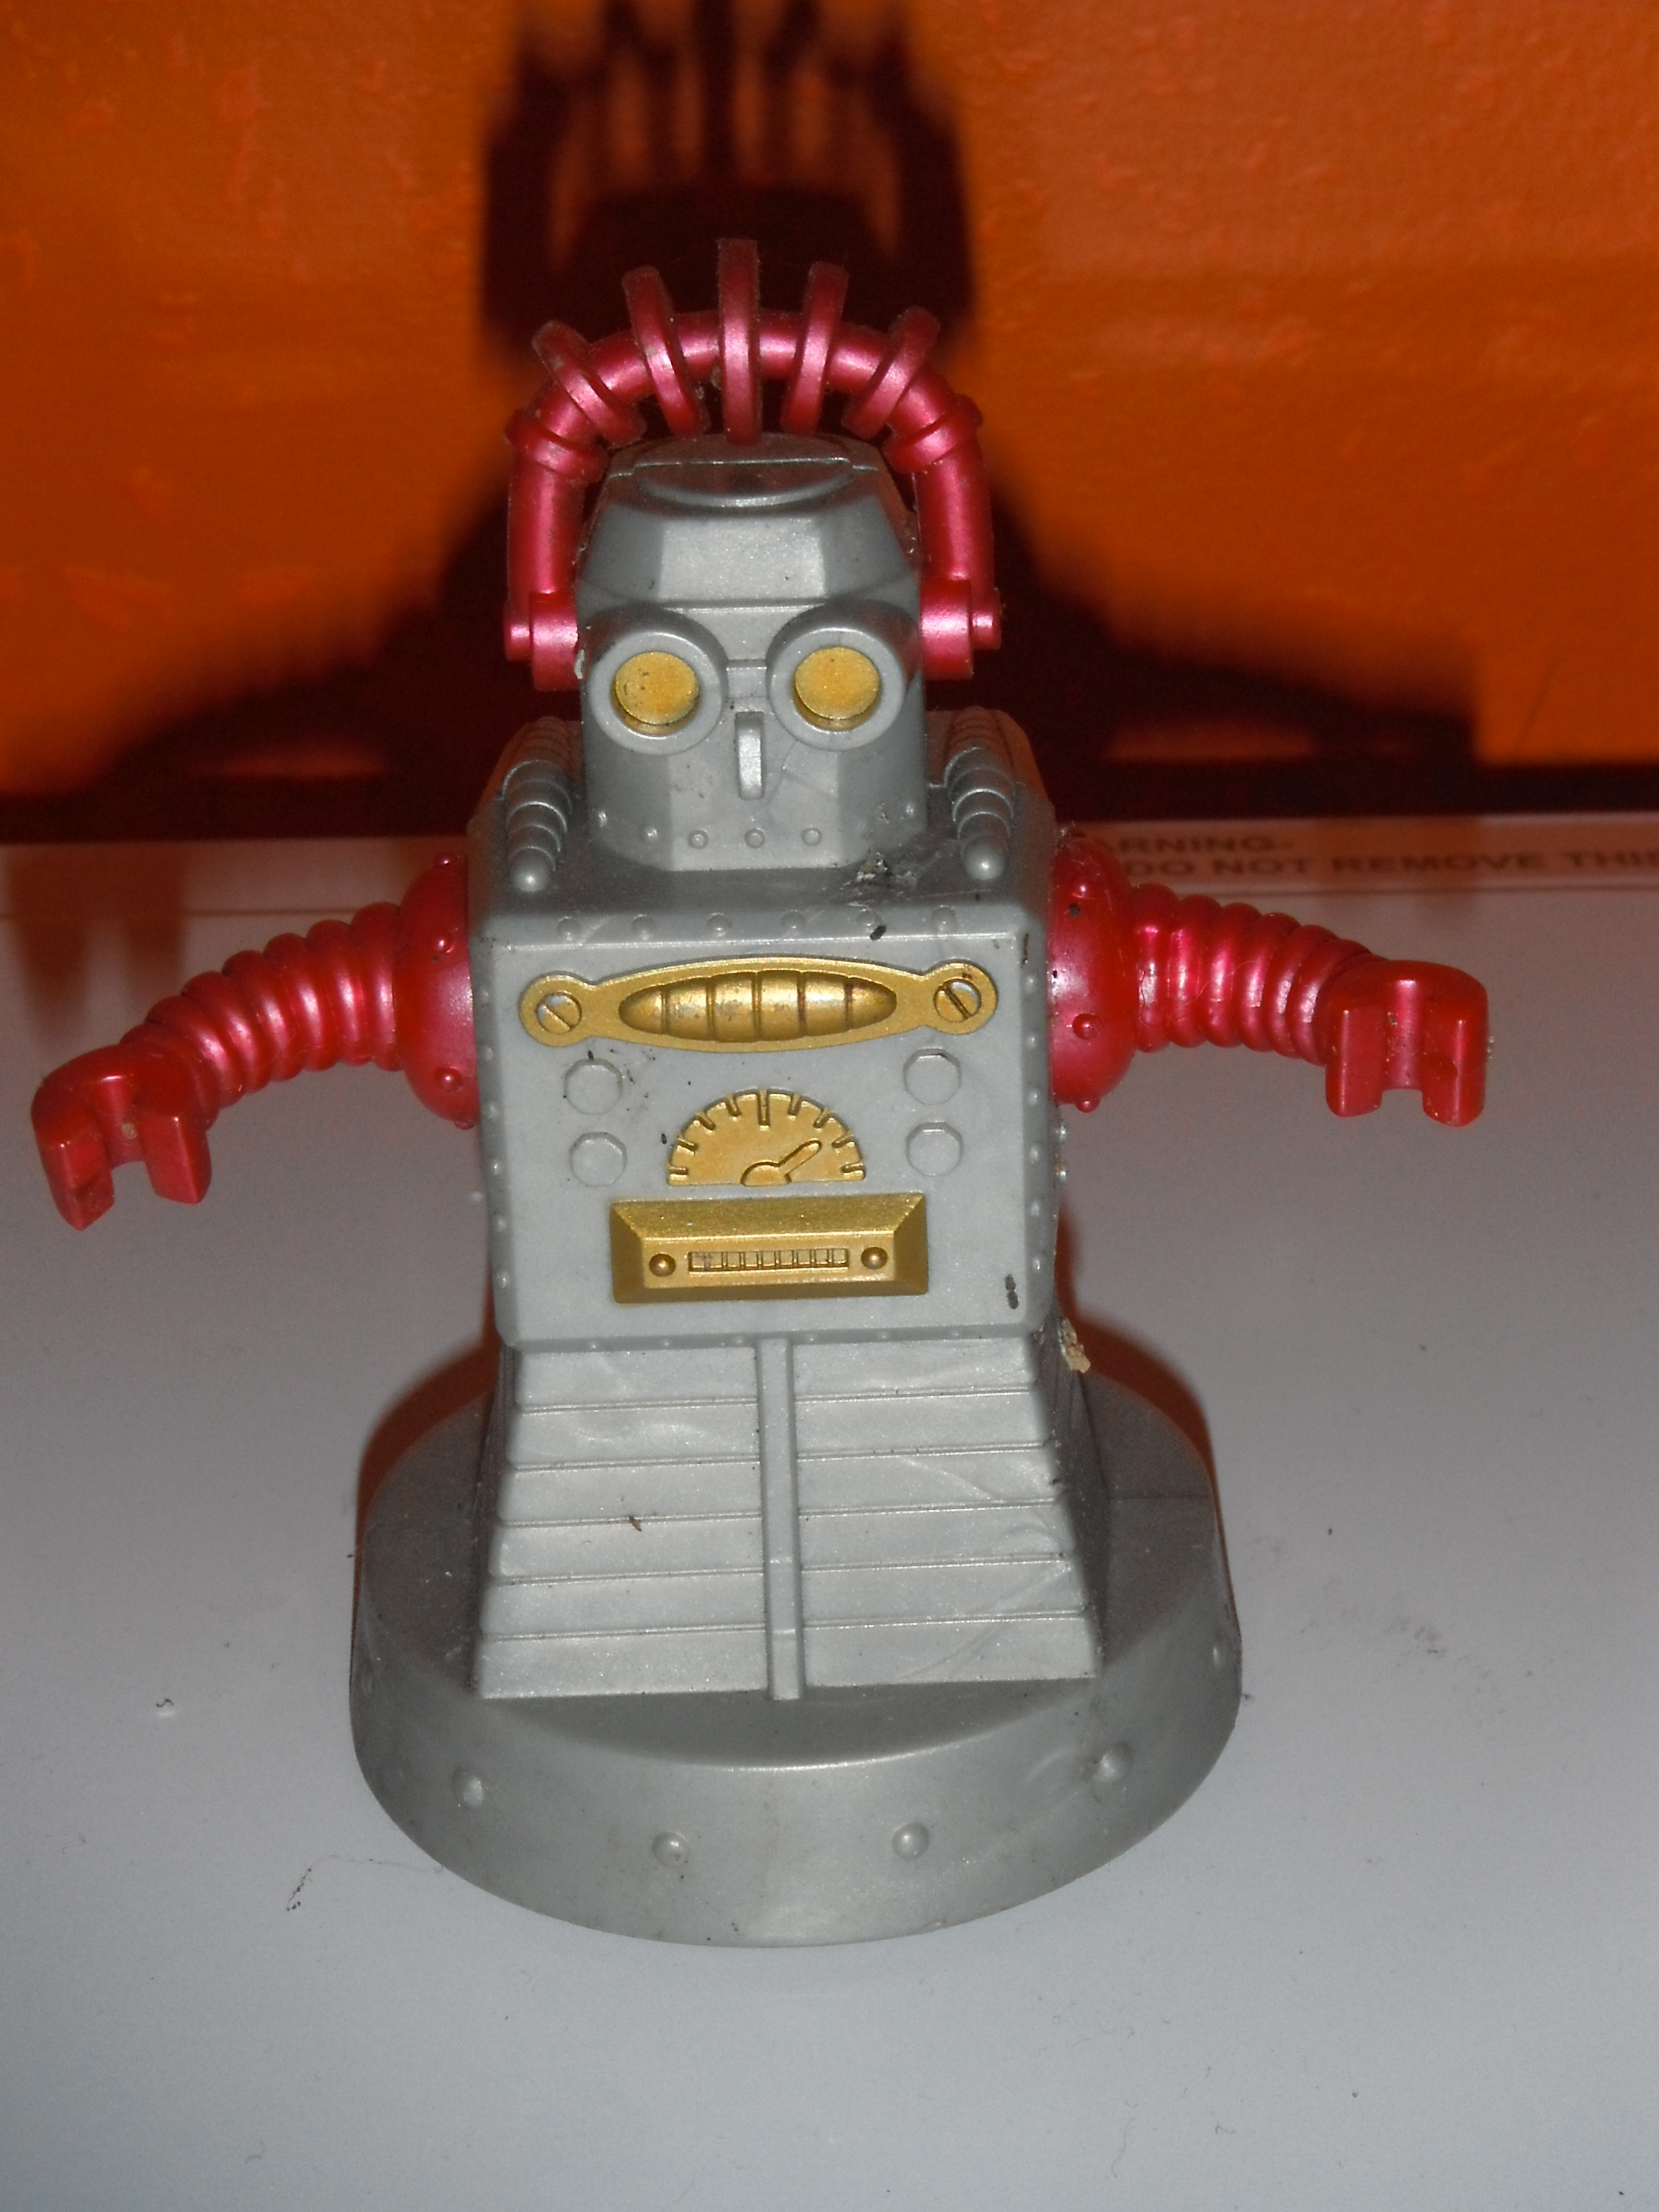 One of my robots - photo taken by me 